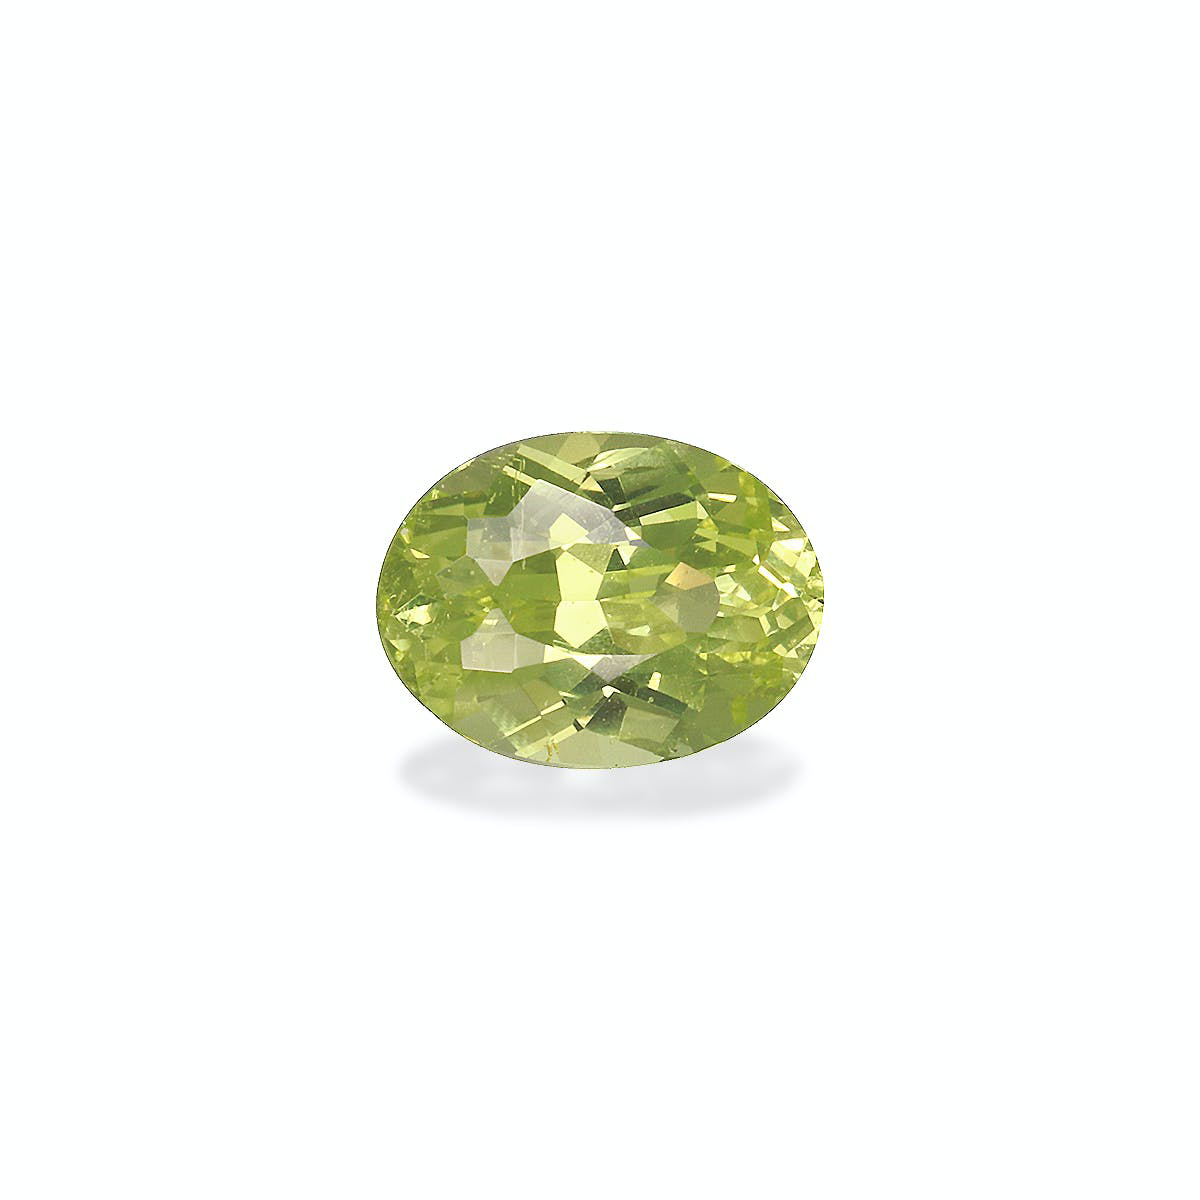 Picture of Lime Green Chrysoberyl 1.58ct - 8x6mm (CB0131)